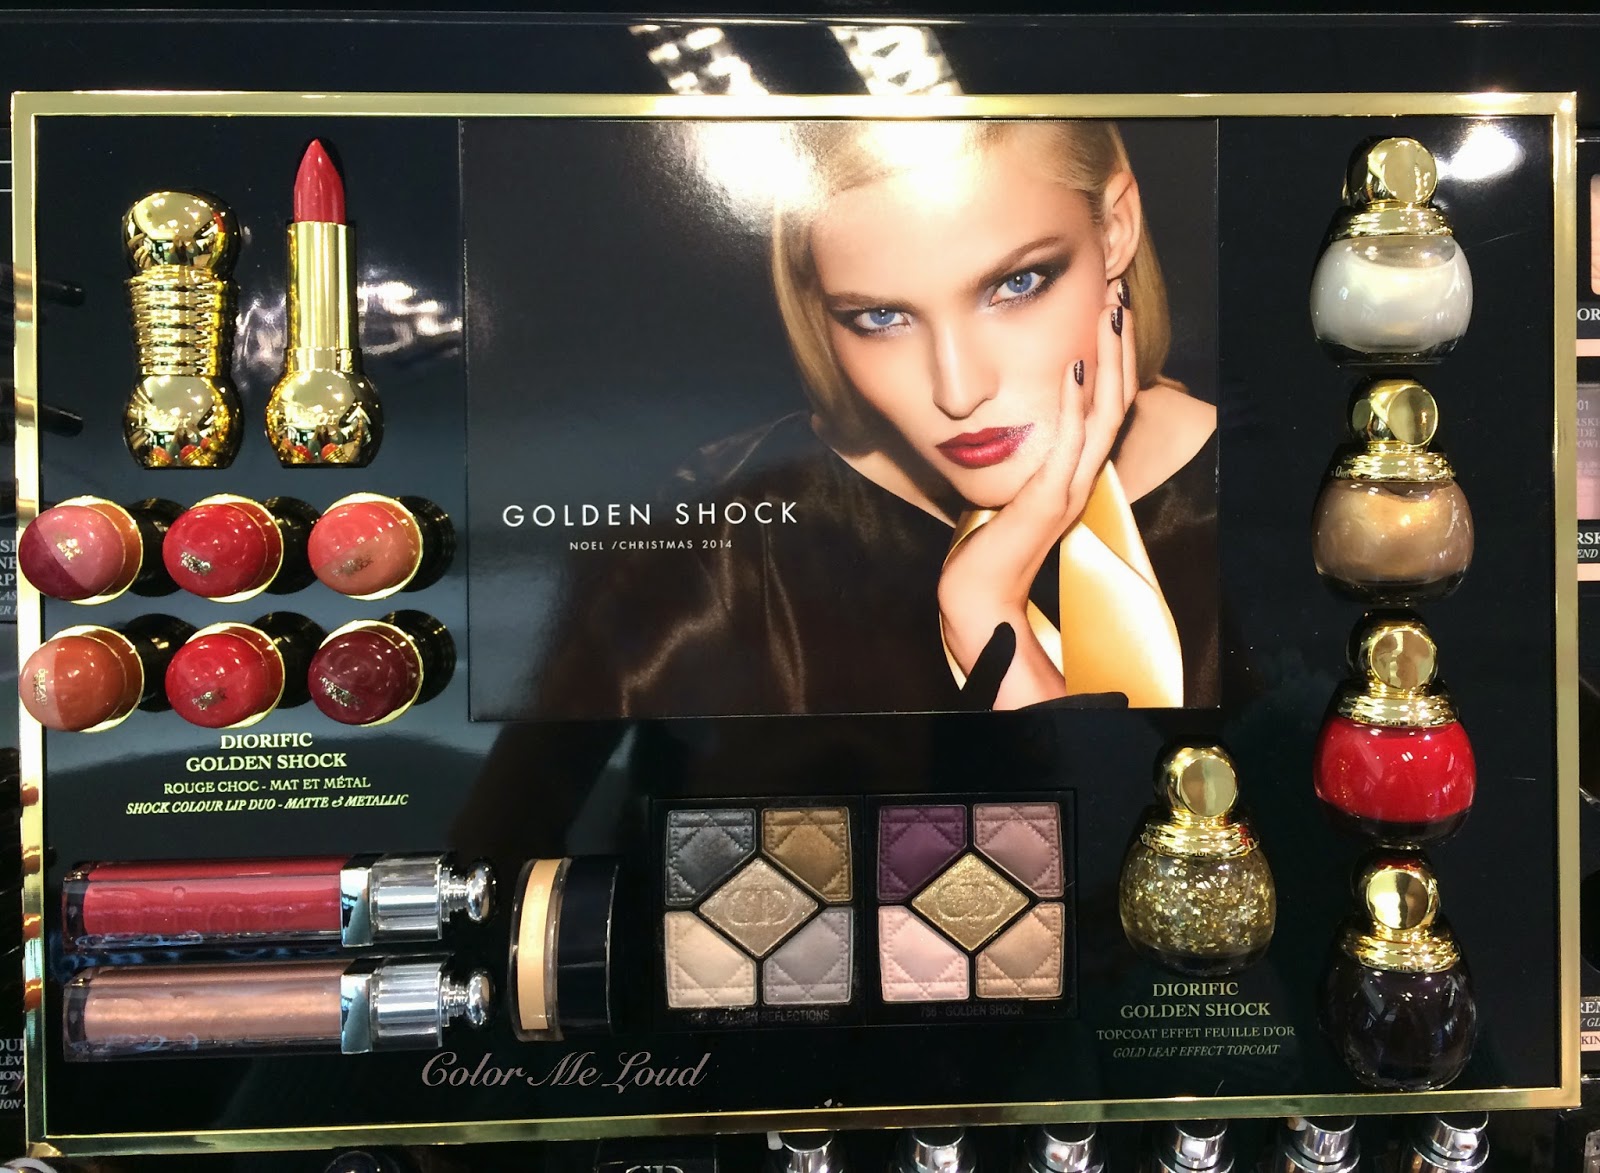 Dior Swatches of all lipsticks, lip glosses and eye shadow quads from Golden Shock Collection for Holiday 2014